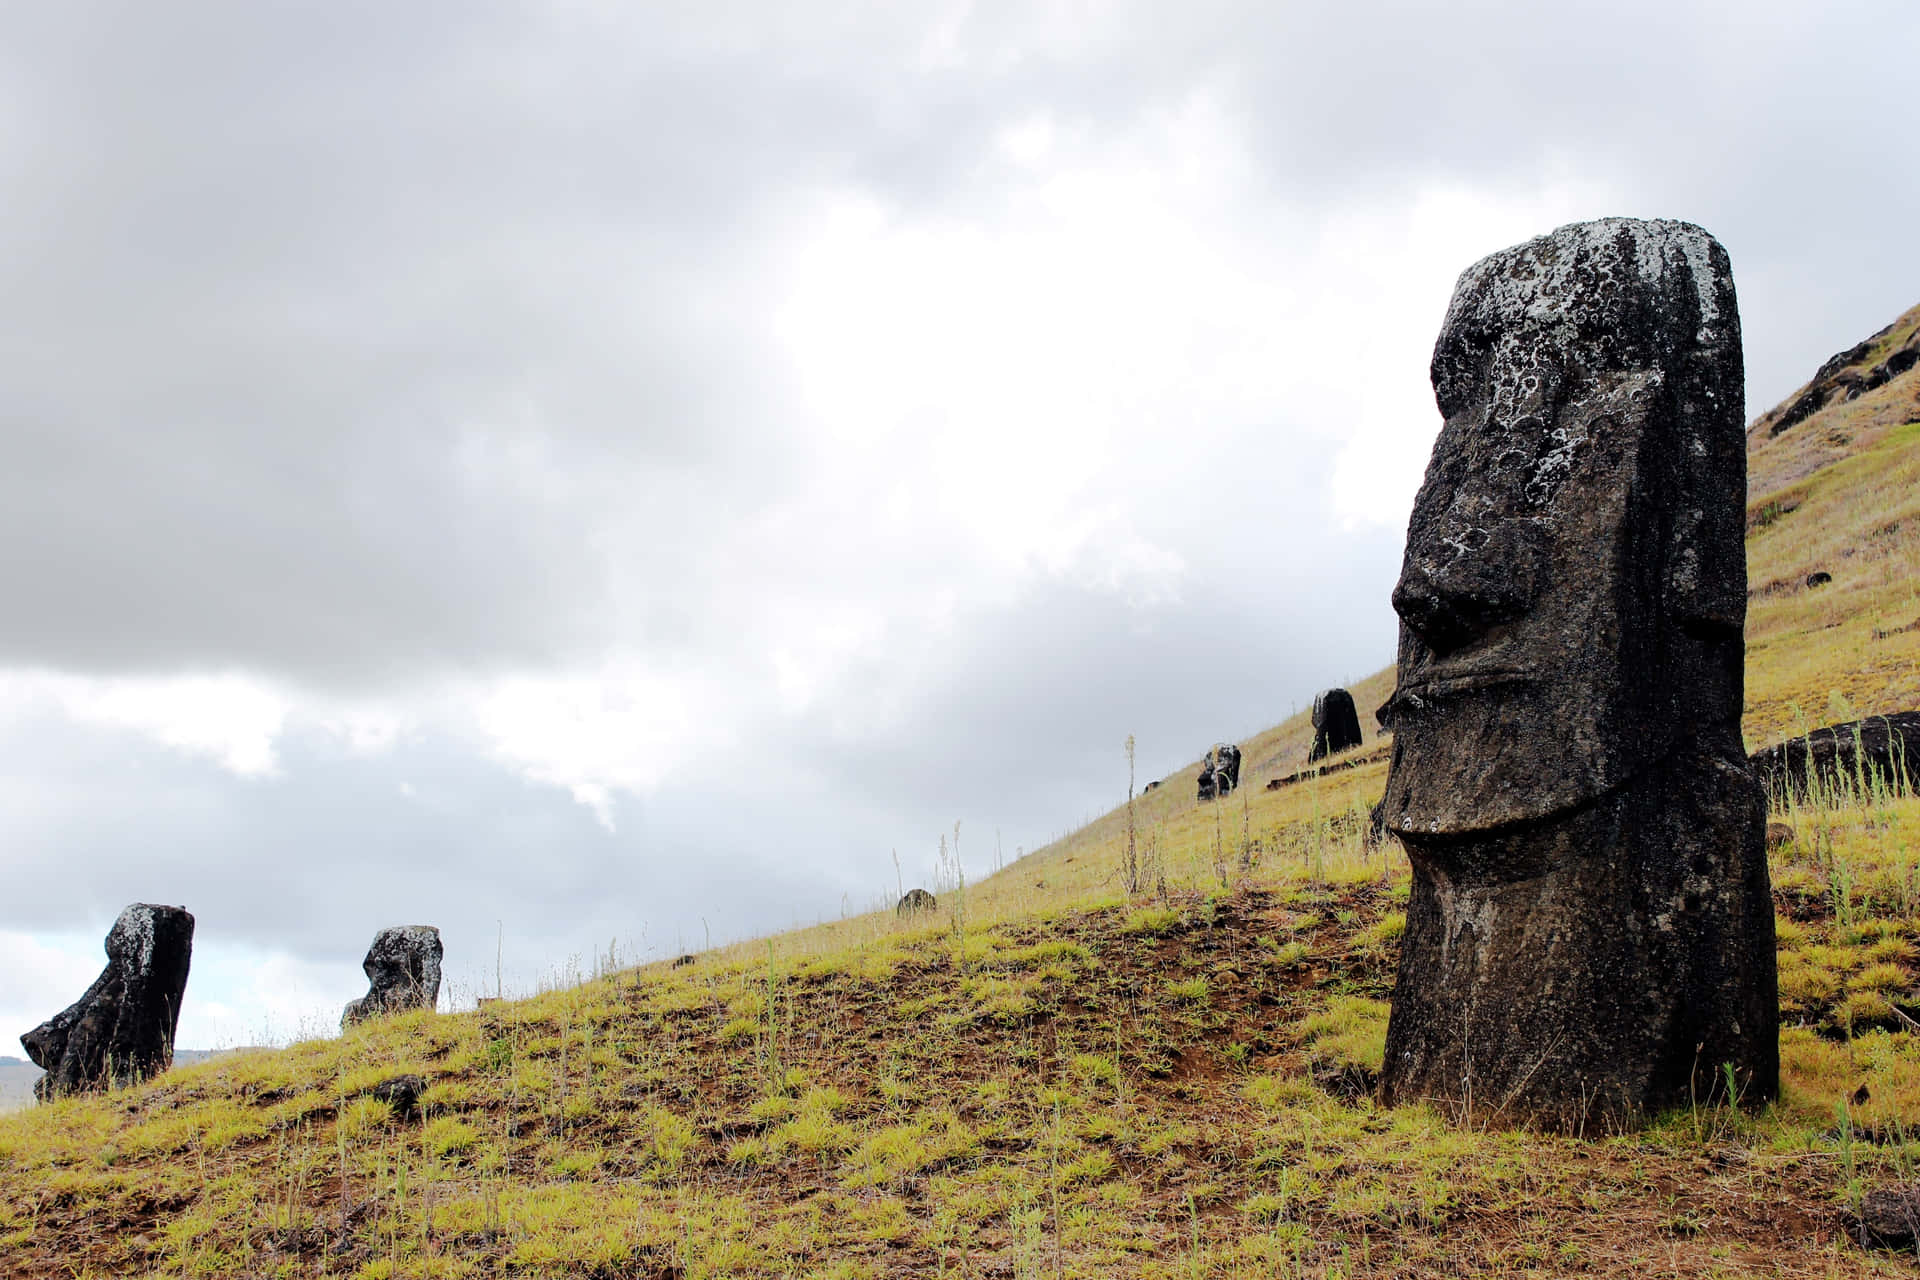 Majestic Moai Statues on the Rugged Terrains of Easter Island, Chile Wallpaper